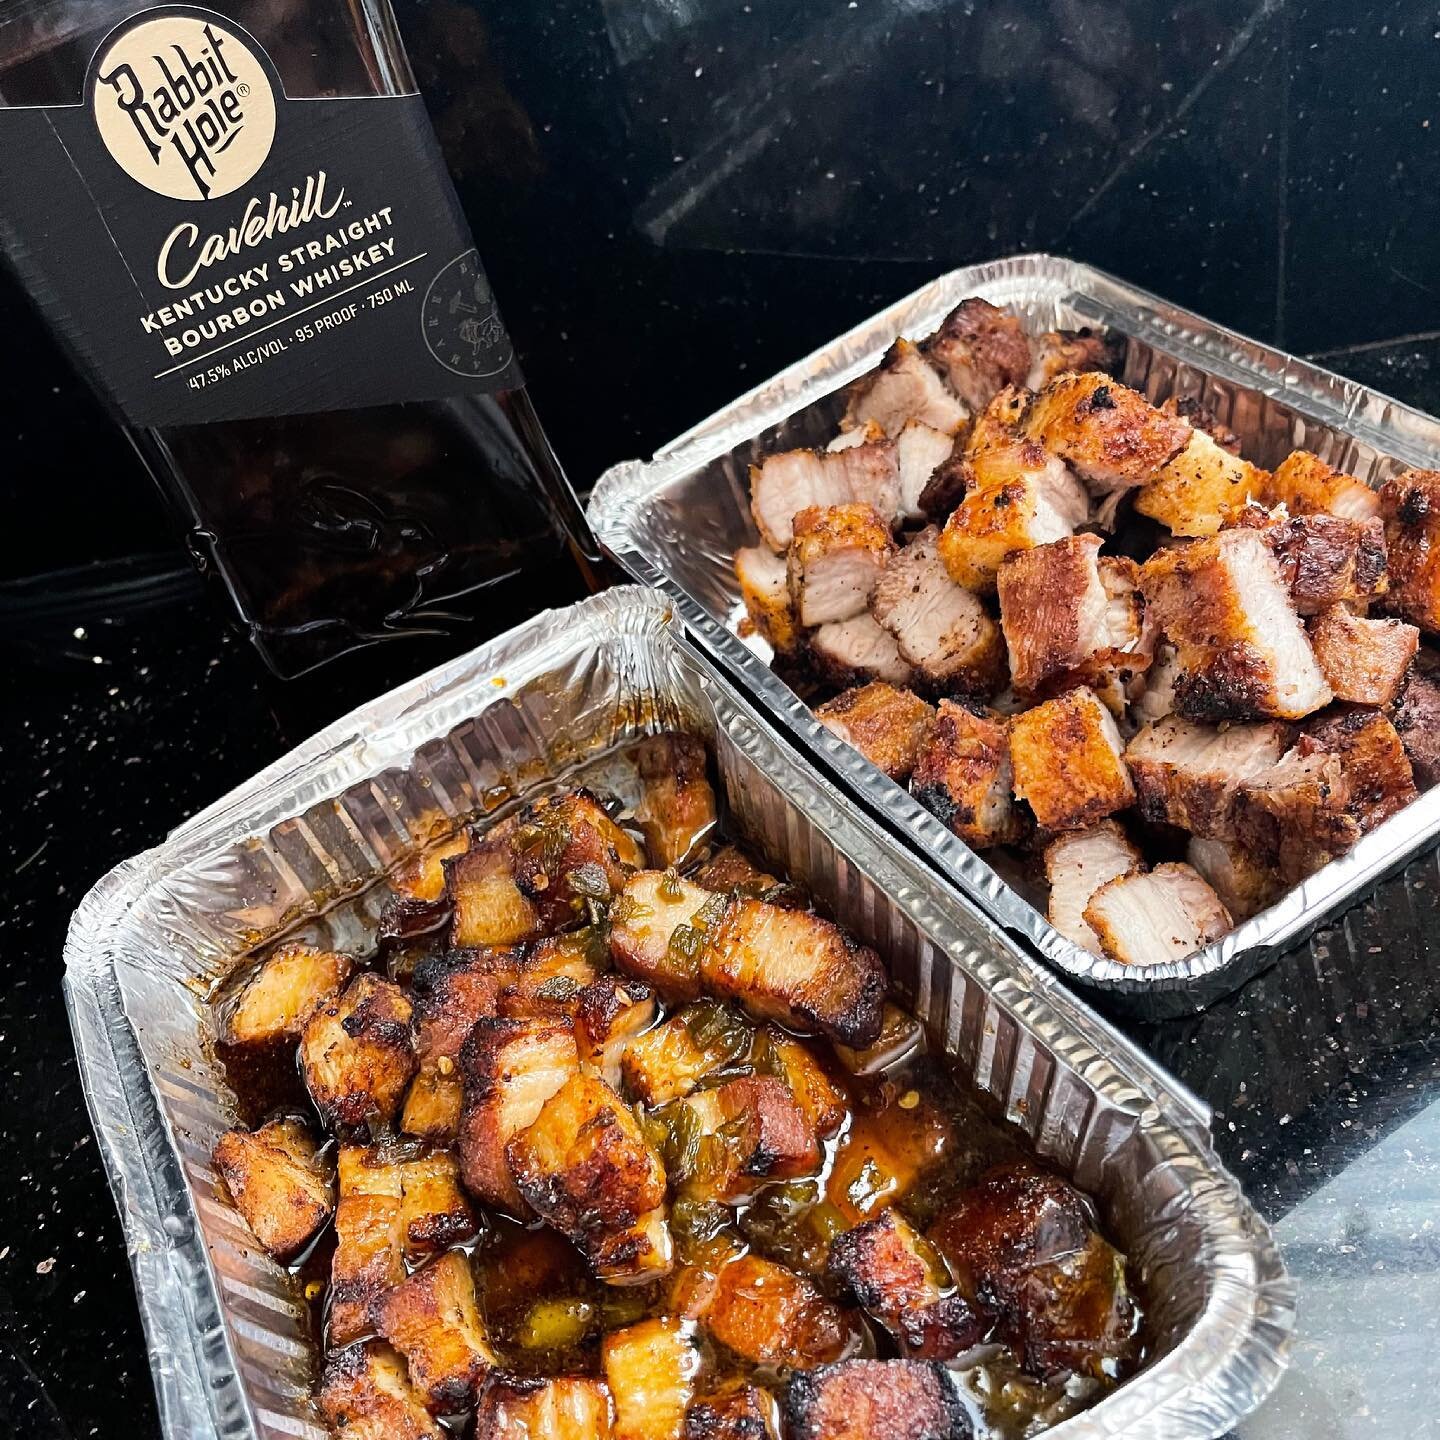 Pork Belly along with a bottle of @rabbithole Cavehill Bourbon Whiskey. 
Watch that initial maple bourbon with chilies glaze being poured over crispy pork belly before I place it in the grill again for its final charred up glaze. 

This is how we cel